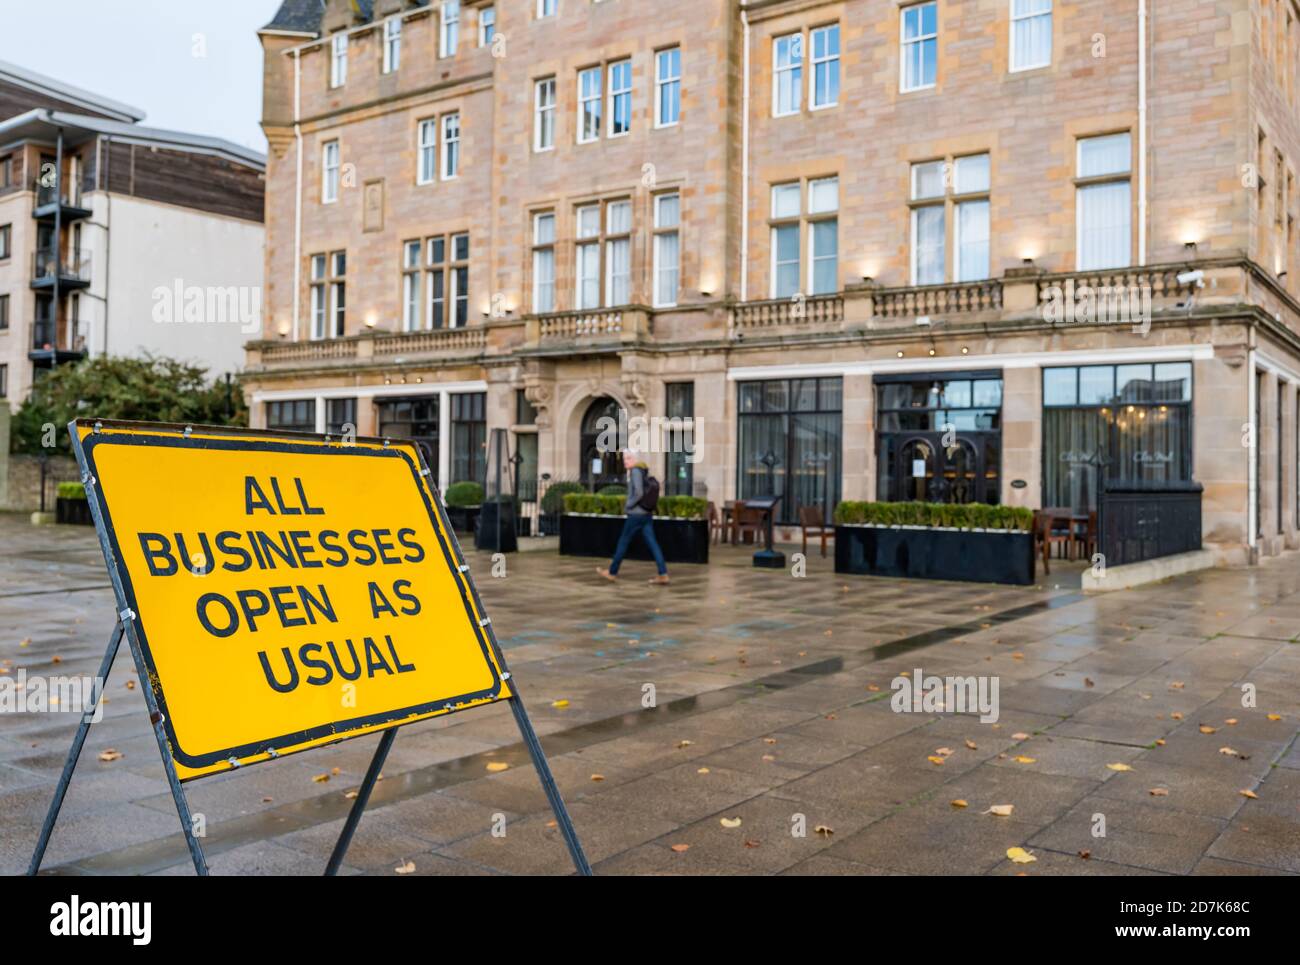 The Shore, Leith, Edinburgh, Scotland, United Kingdom, 23rd October 2020. Bars & restaurants: many restaurants are closed as the Scottish Government extends restrictions during the Covid-19 pandemic for a 3rd week, but many are still open serving takeaway food and beer. The Malmaison Hotel's Chez Mal restaurant is only open to hotel guests. There is some irony with the Trams to Newhaven 'All Businesses Open as Usual' sign nearby Stock Photo